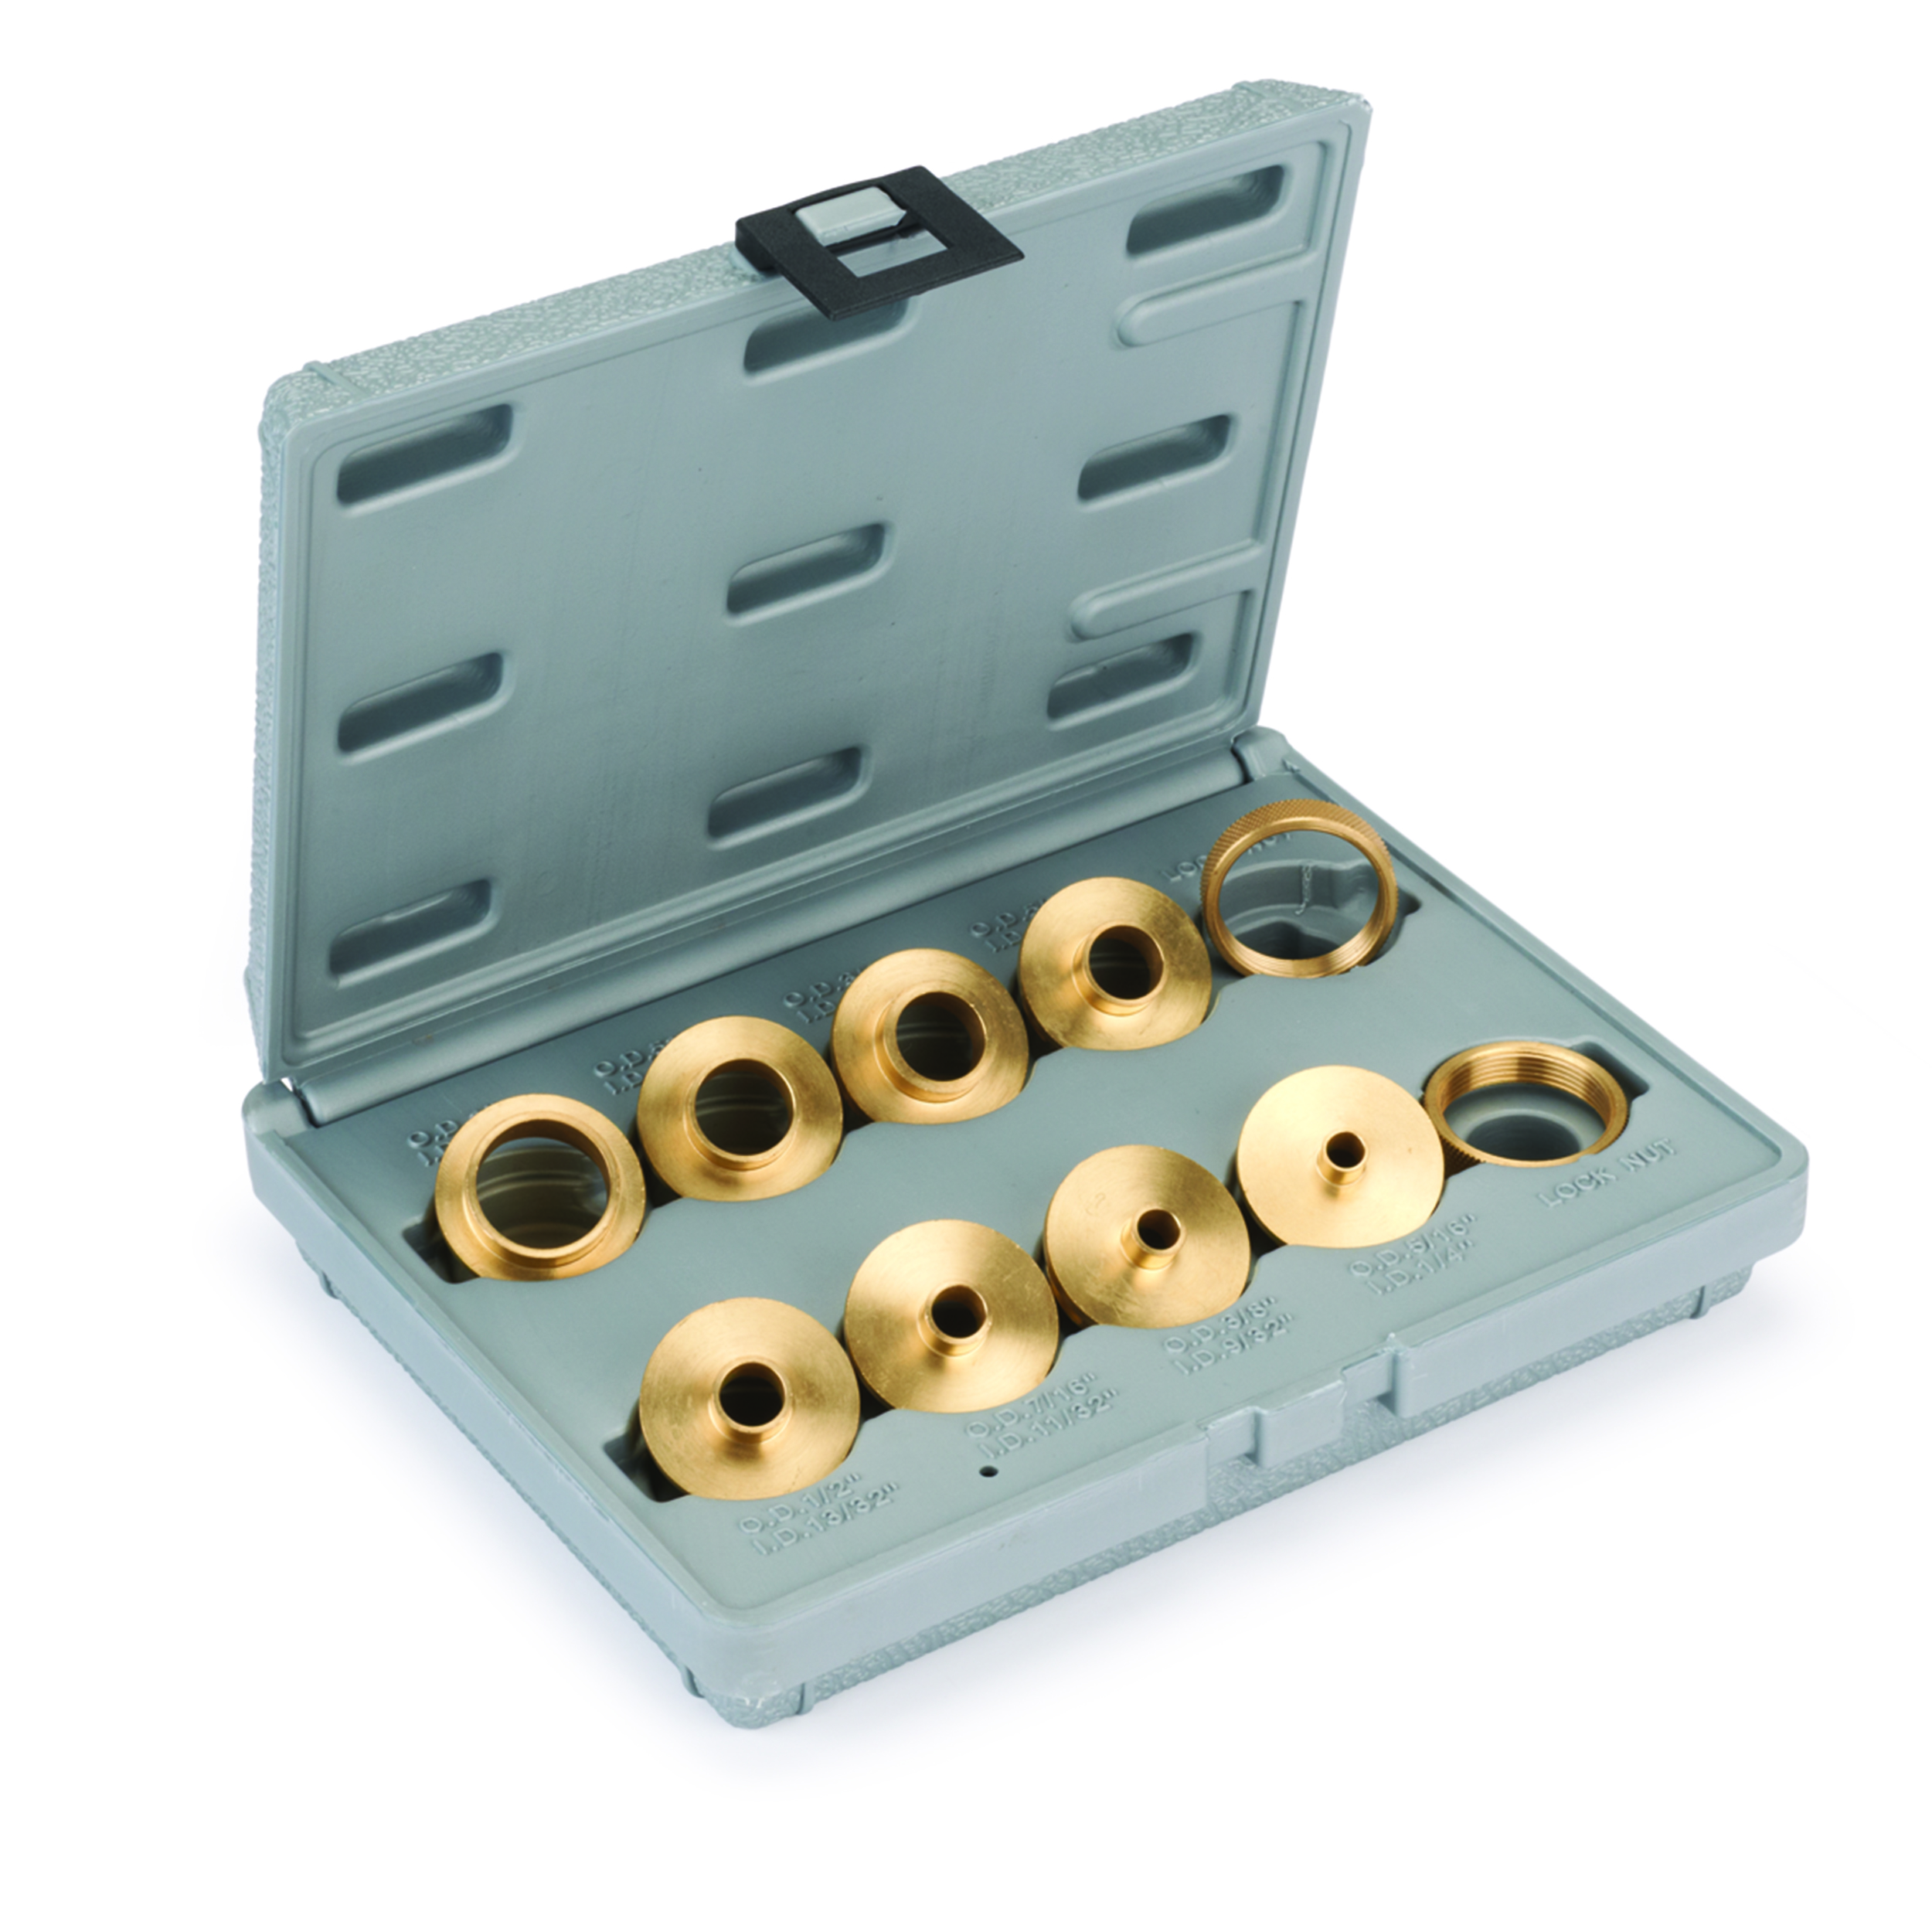 10 Piece Router Bushing Set With Case